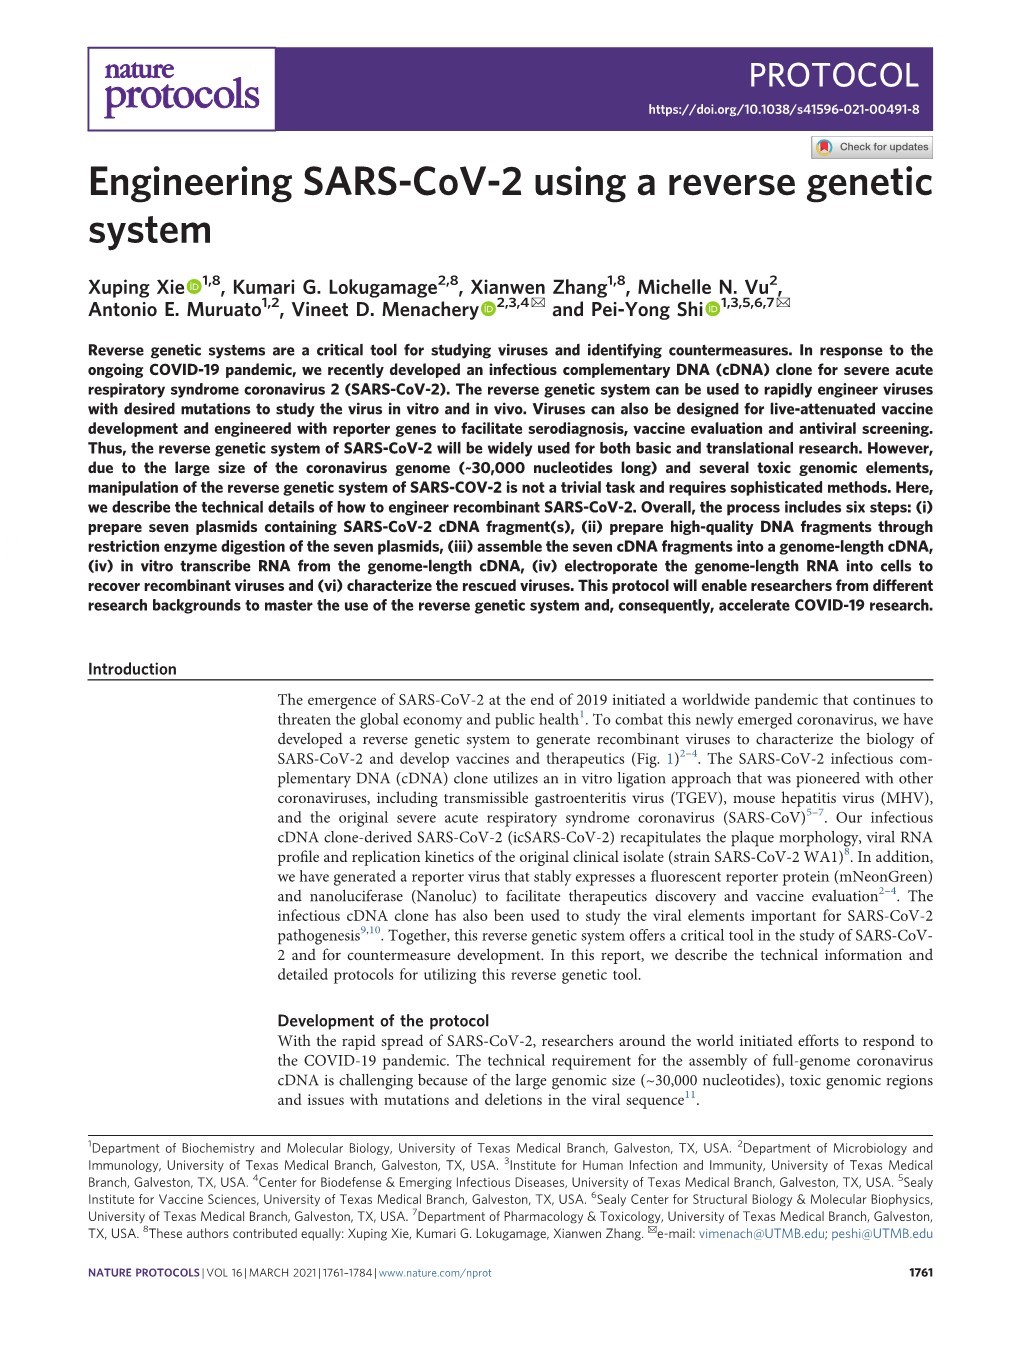 Engineering SARS-Cov-2 Using a Reverse Genetic System